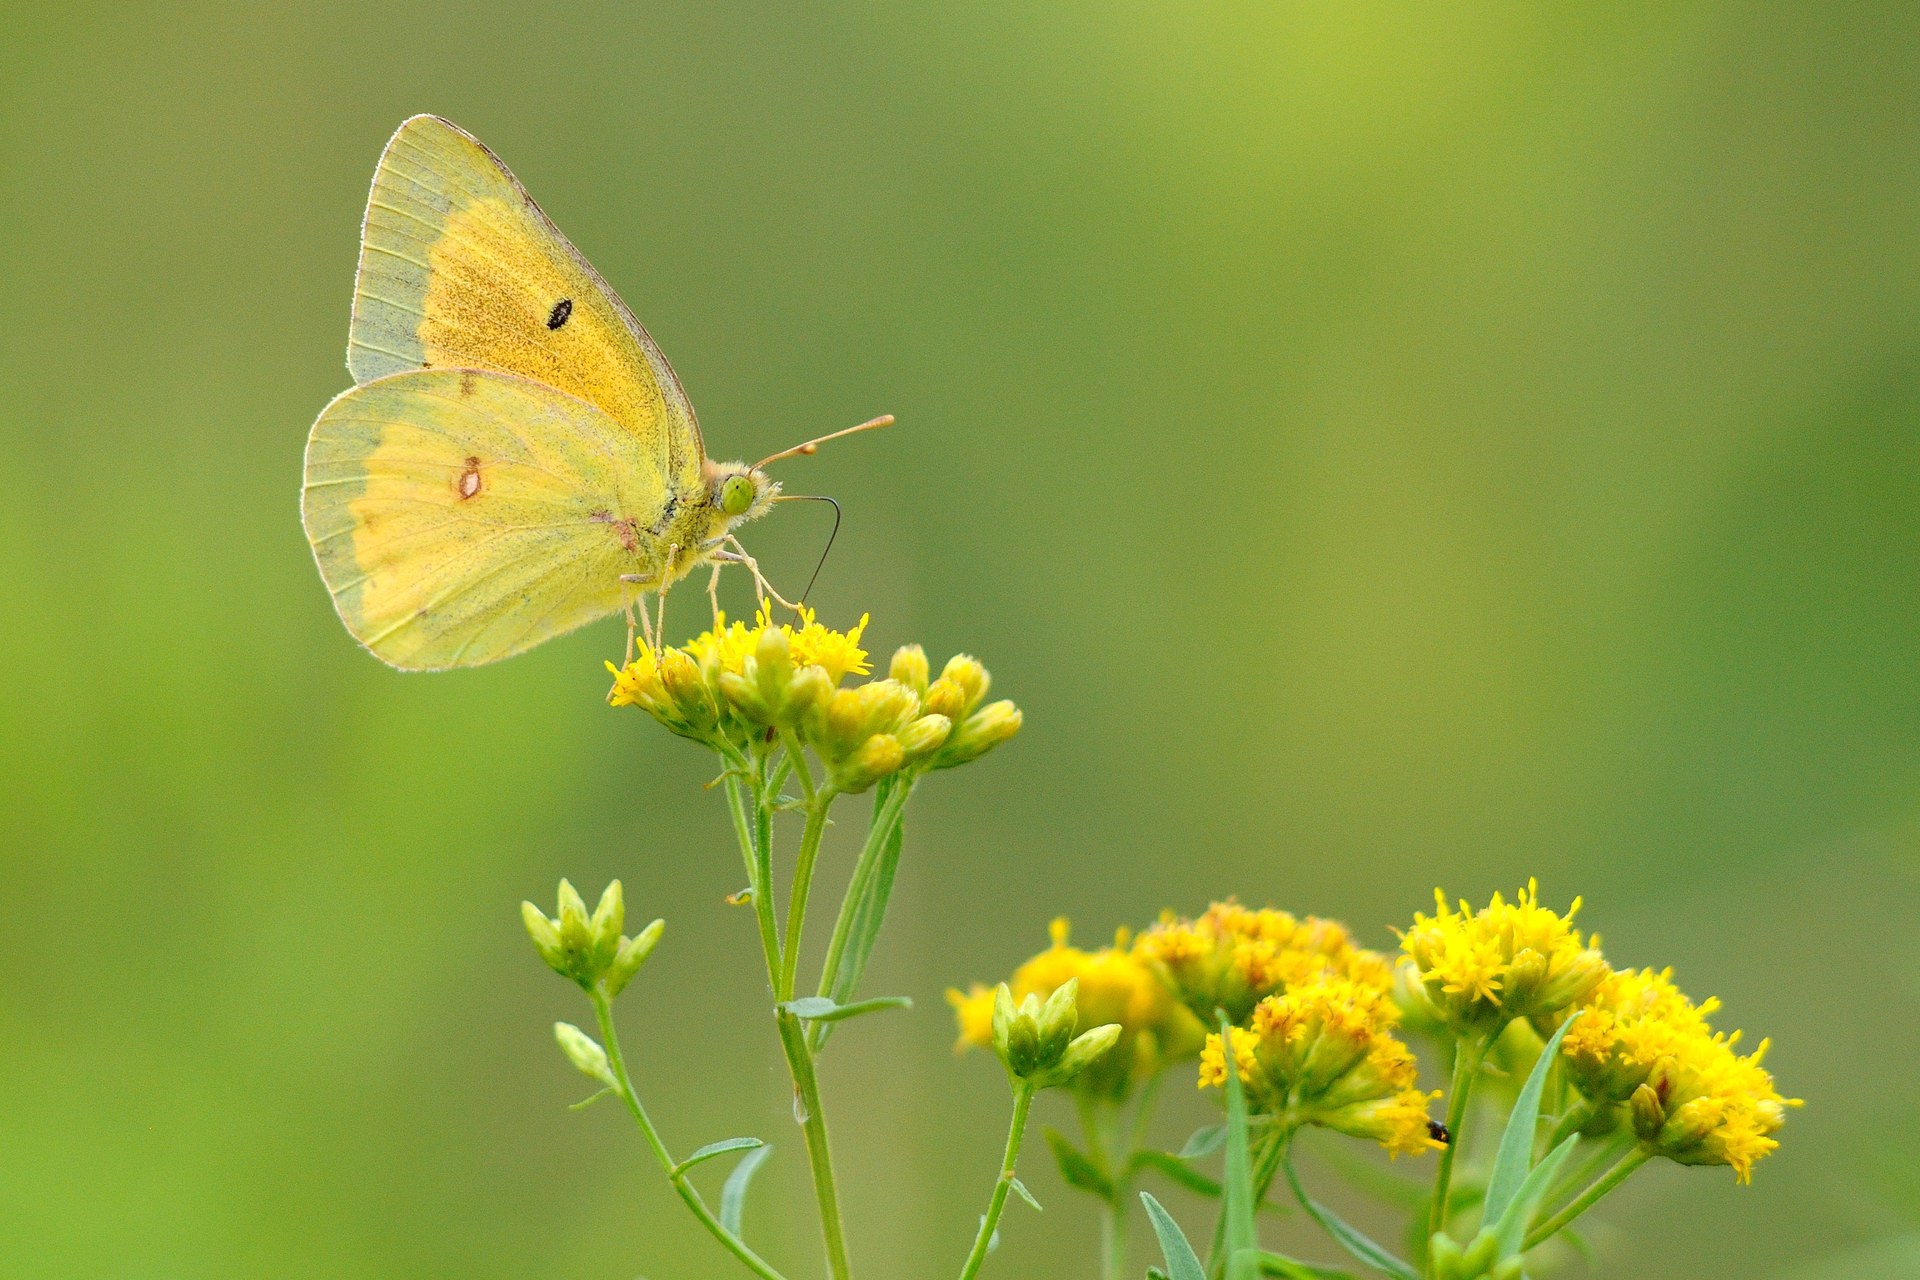 A Clouded Sulphur Butterfly on a yellow flower.